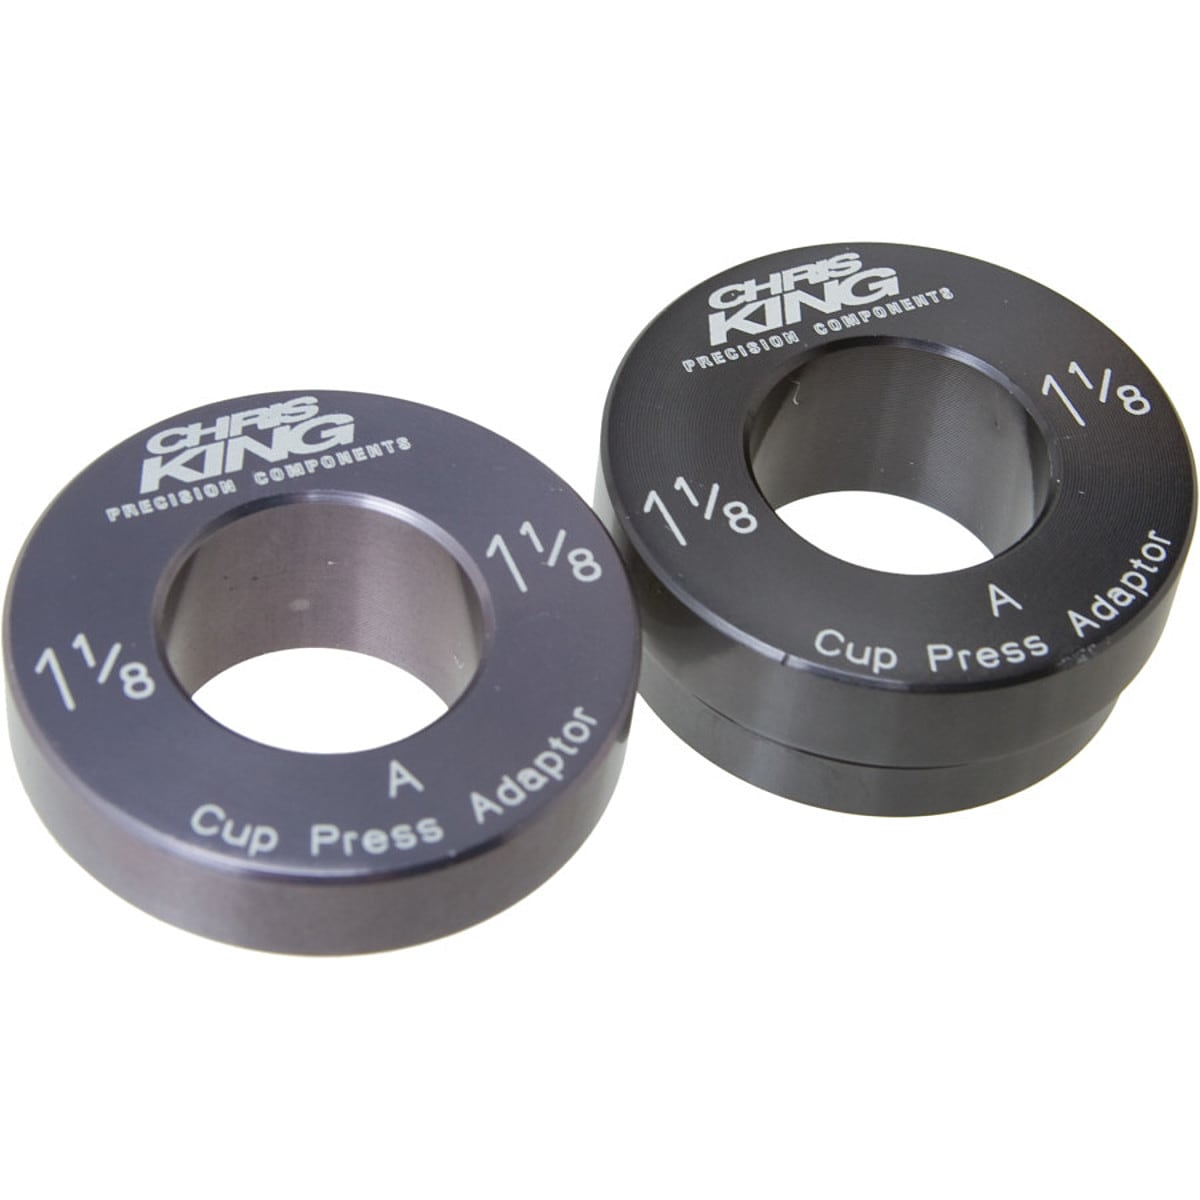 Chris King Headset Cup Press Adapter